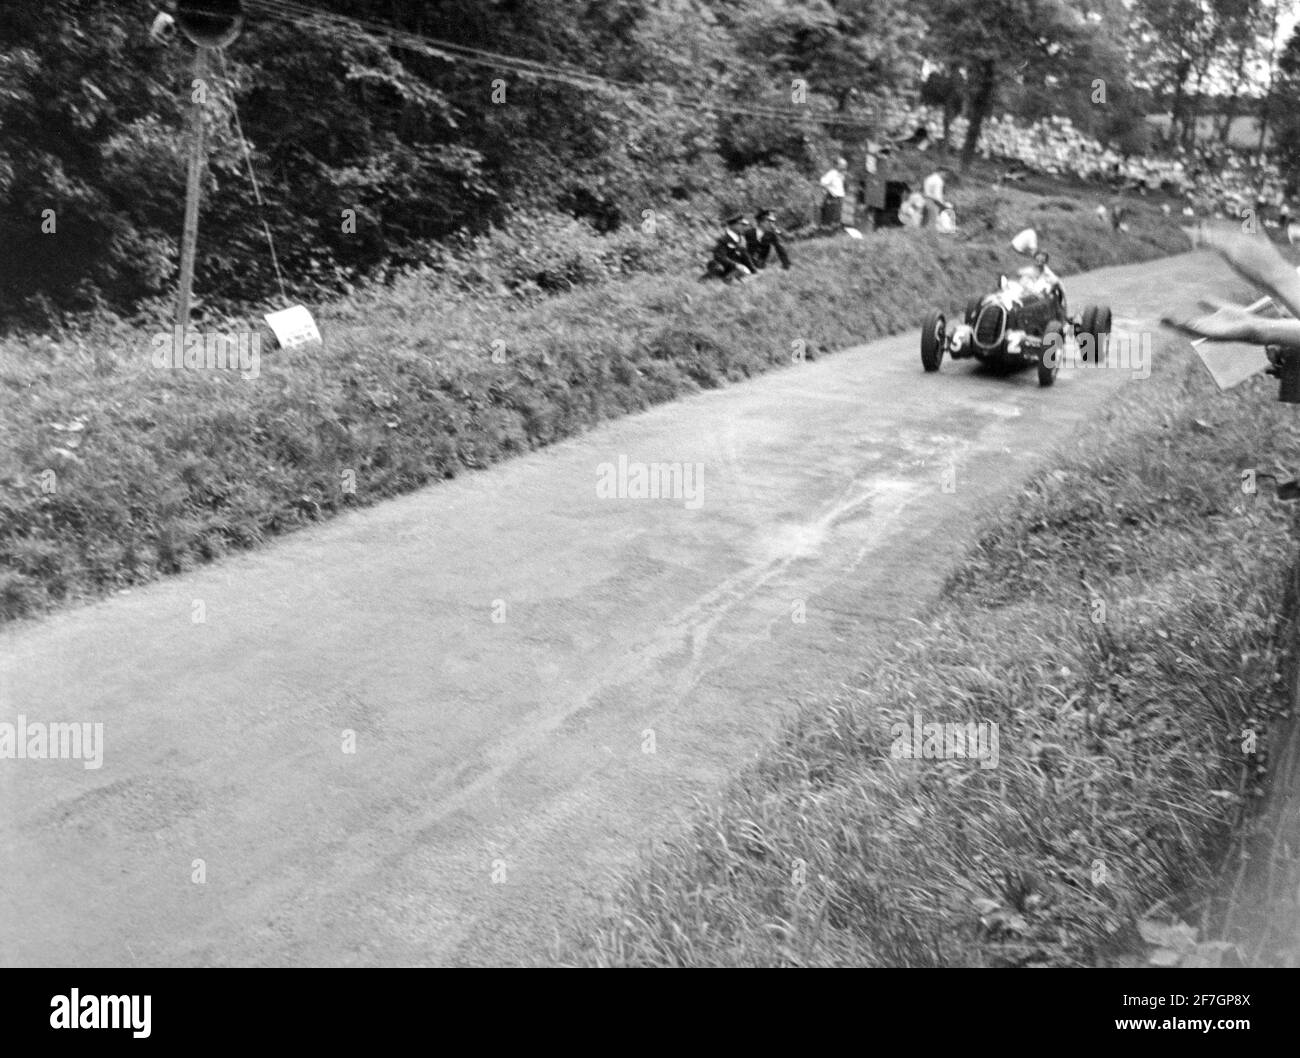 Vintage black and white photograph taken in 1950 at Shelsley Walsh Hill Climb race track in England. Driver R. D. Poole driving an Alfa 3800(S). Stock Photo